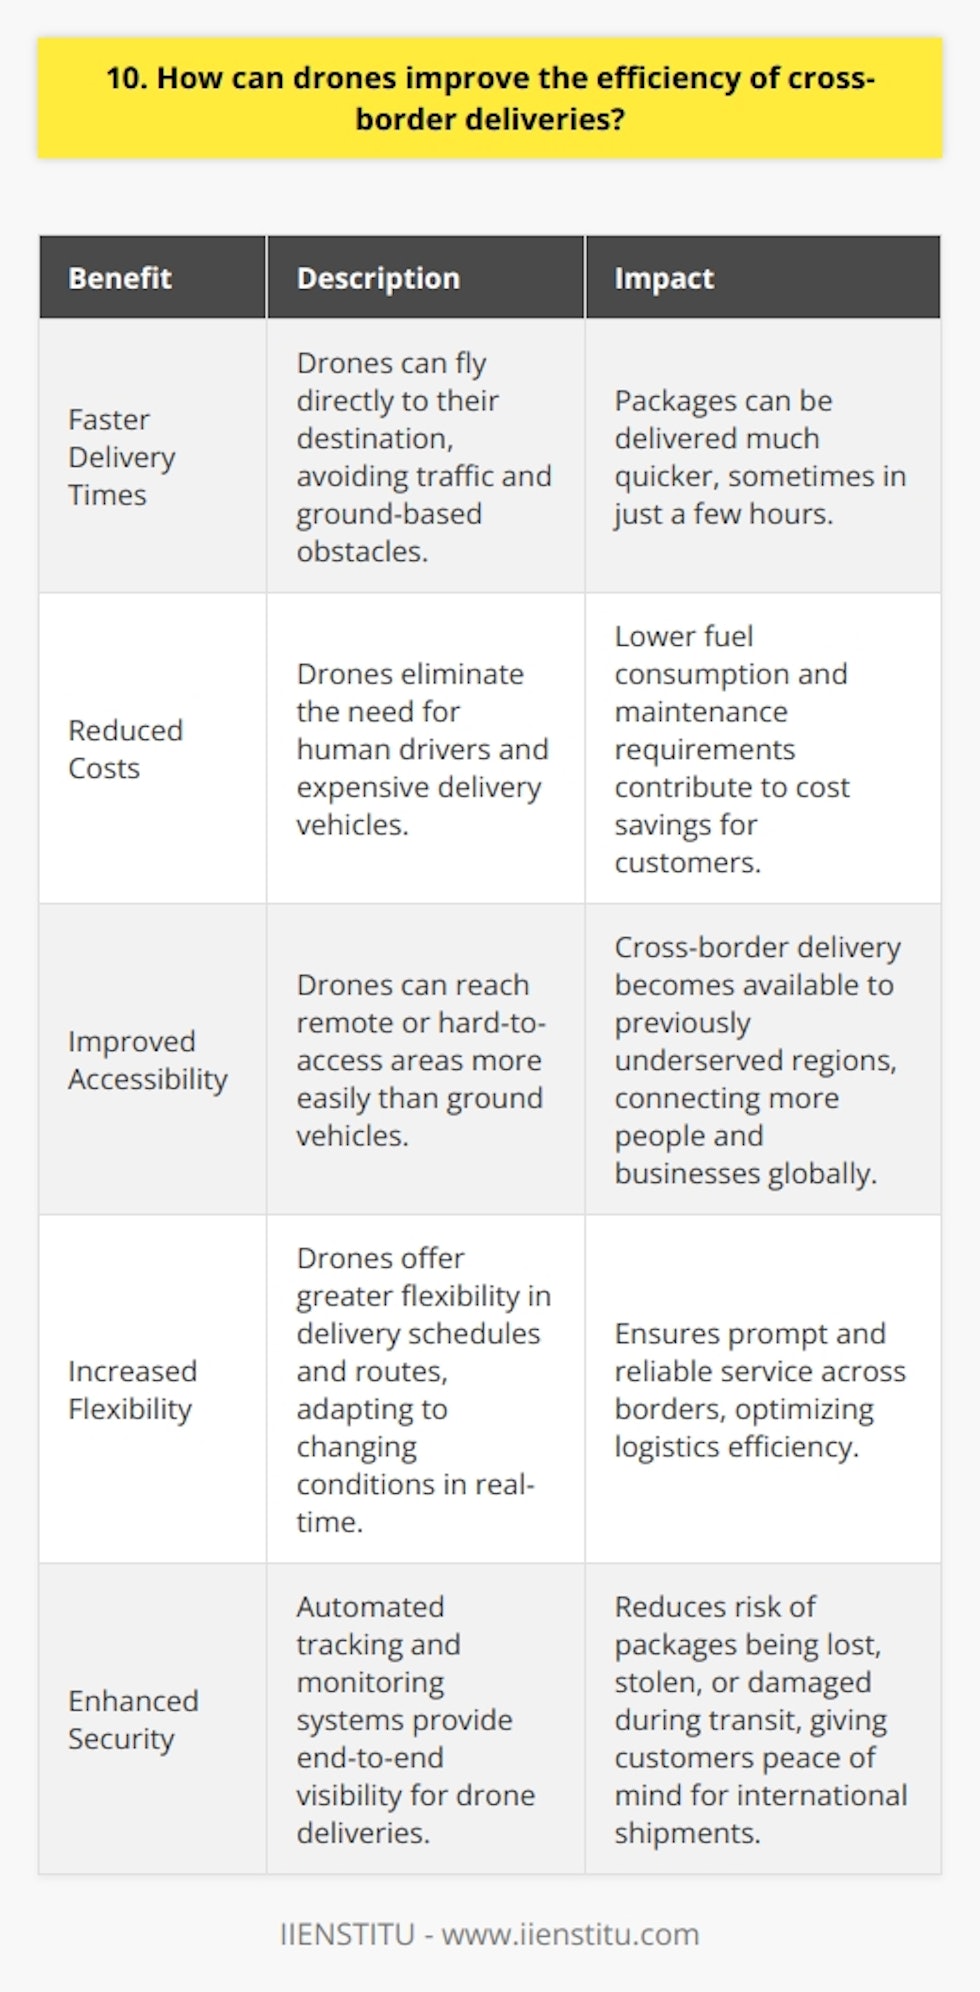 Drones can significantly improve the efficiency of cross-border deliveries in several ways: Faster Delivery Times Drones can fly directly to their destination, avoiding traffic and other ground-based obstacles. This means packages can be delivered much quicker than traditional methods, sometimes in just a few hours. Reduced Costs By eliminating the need for human drivers and expensive delivery vehicles, drones can greatly reduce operational costs. Lower fuel consumption and maintenance requirements contribute to cost savings that can be passed on to customers. Improved Accessibility Drones can reach remote or hard-to-access areas more easily than ground vehicles. This opens up cross-border delivery to regions that were previously underserved, connecting more people and businesses globally. Increased Flexibility Drones offer greater flexibility in delivery schedules and routes. They can adapt to changing conditions and optimize their paths in real-time, ensuring prompt and reliable service even across borders. Enhanced Security With drones, theres less risk of packages being lost, stolen, or damaged during transit. Automated tracking and monitoring systems provide end-to-end visibility, giving customers peace of mind for their international shipments. In my experience, integrating drones into cross-border logistics can revolutionize the industry. By leveraging their speed, cost-efficiency, and adaptability, we can streamline global supply chains and better serve customers worldwide.